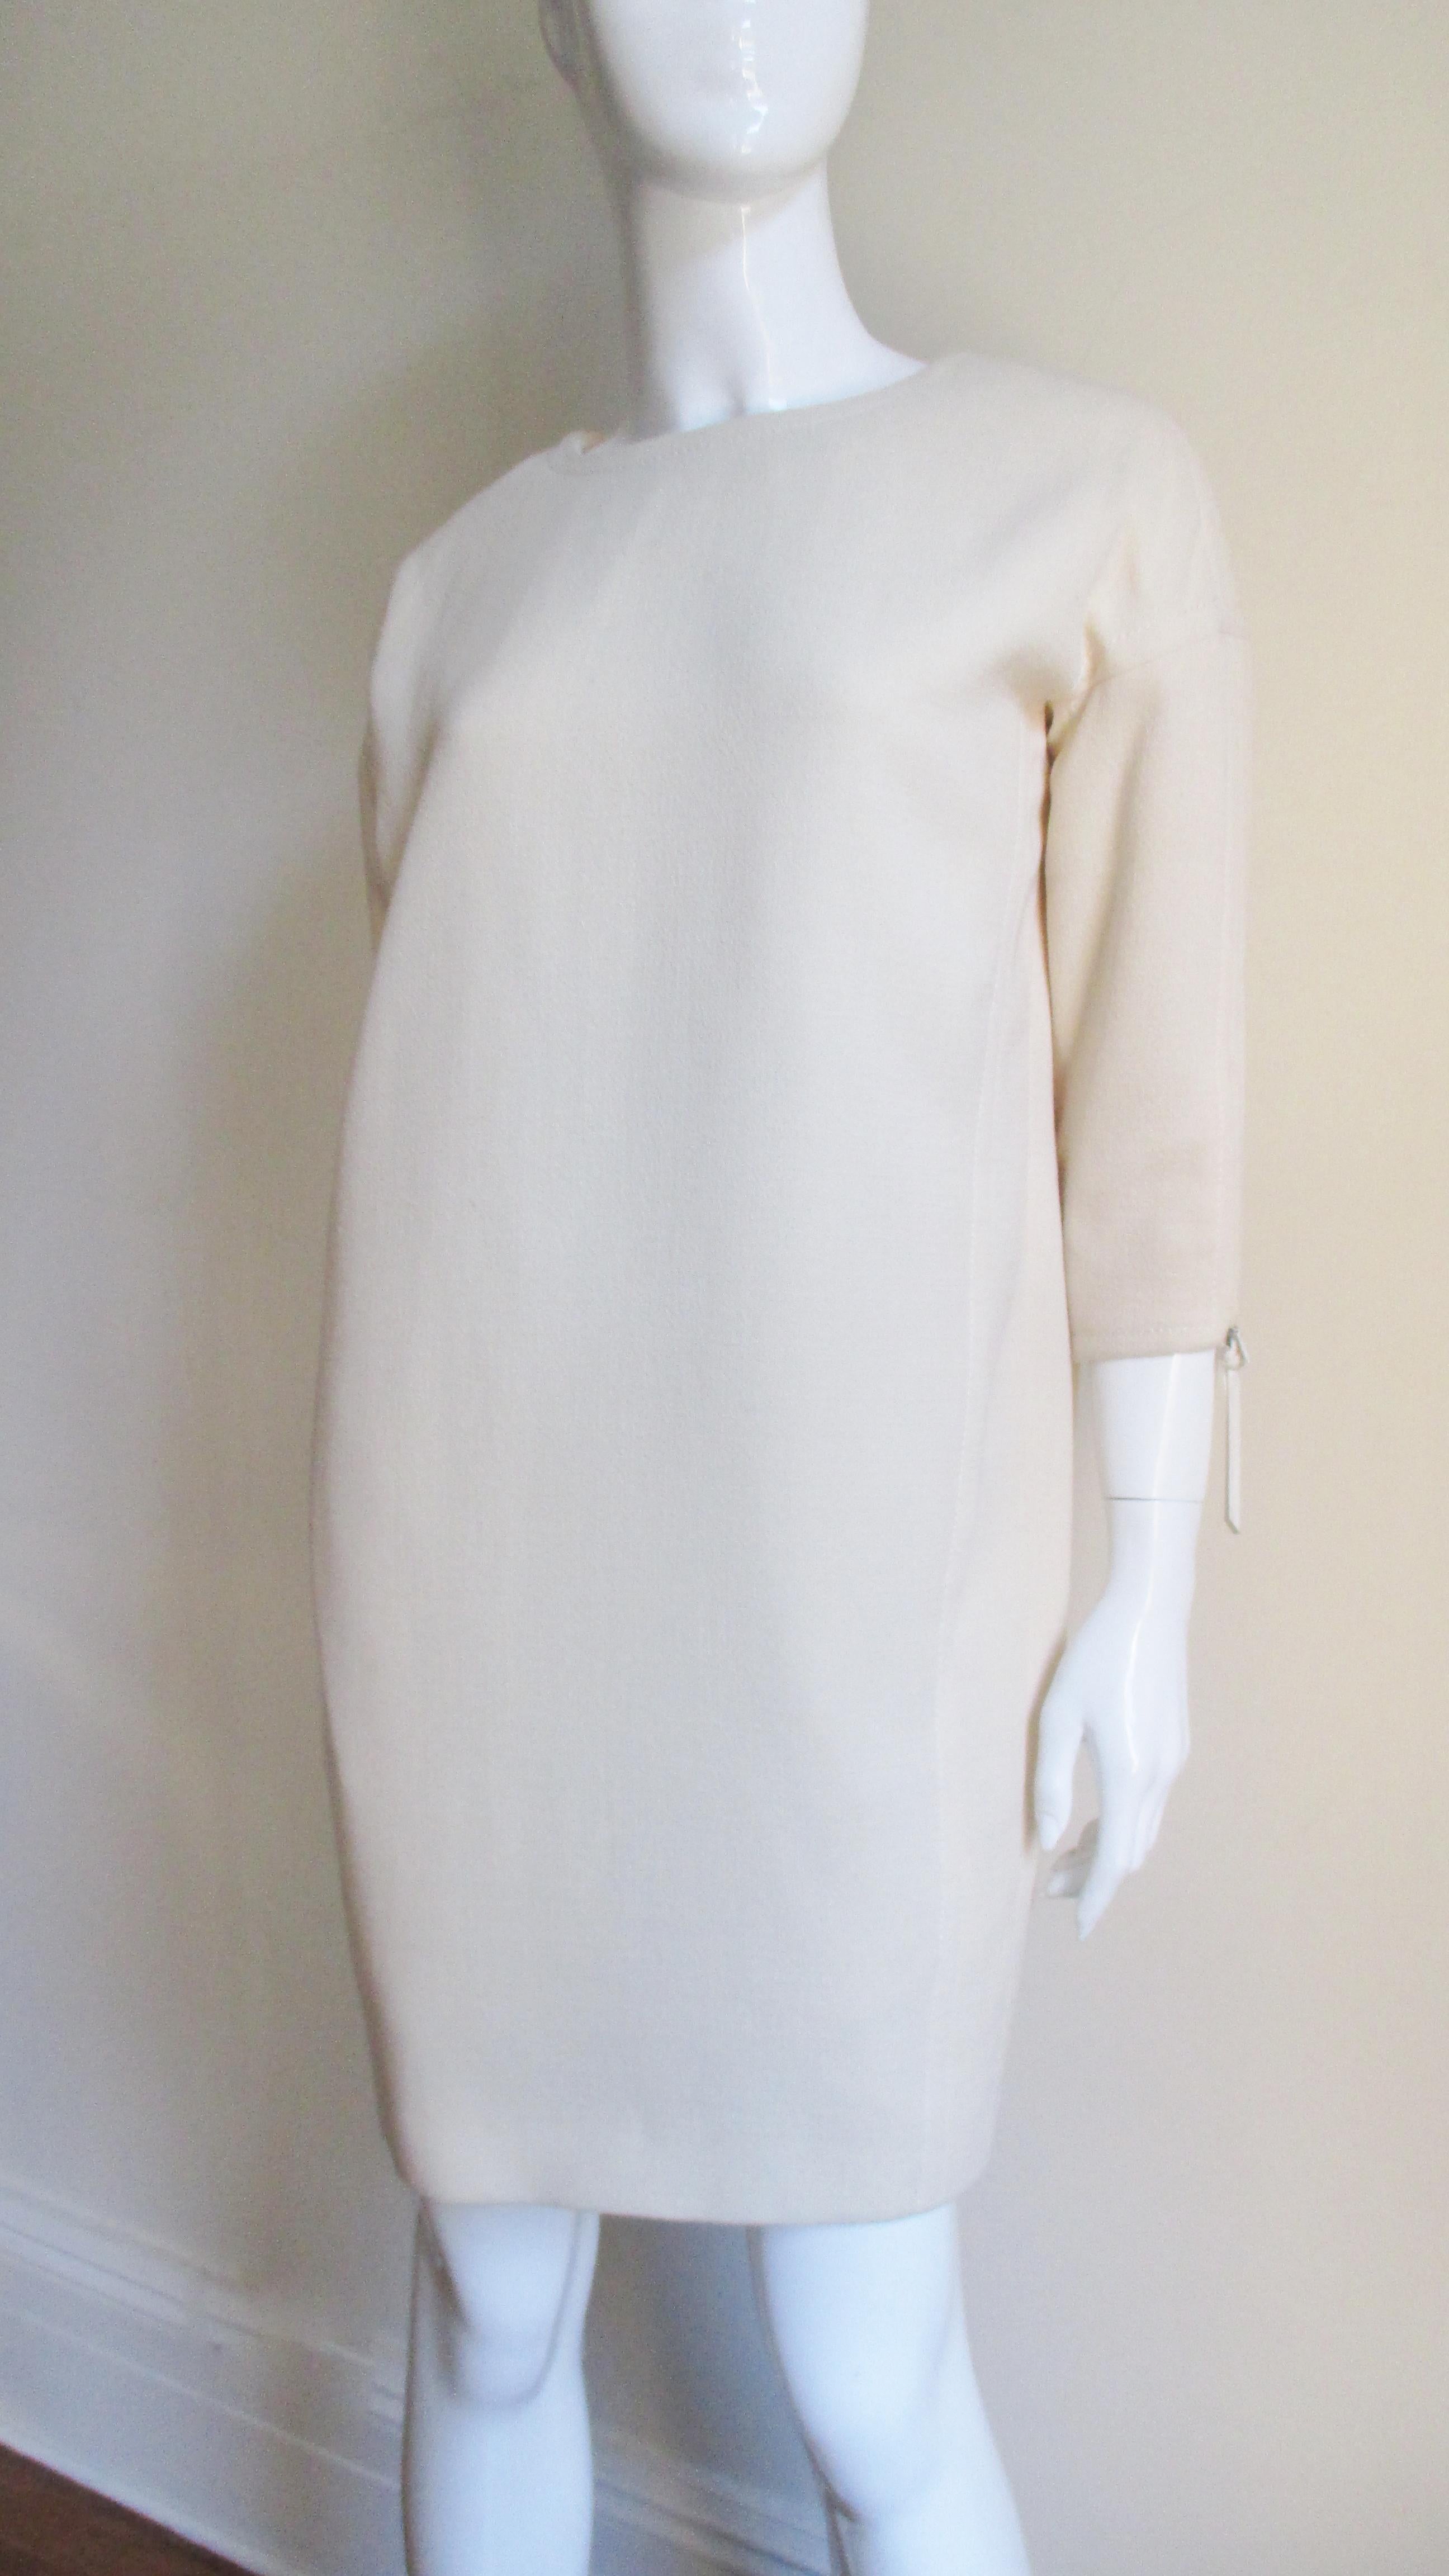  John Galliano for Christian Dior Dress 1990s For Sale 1